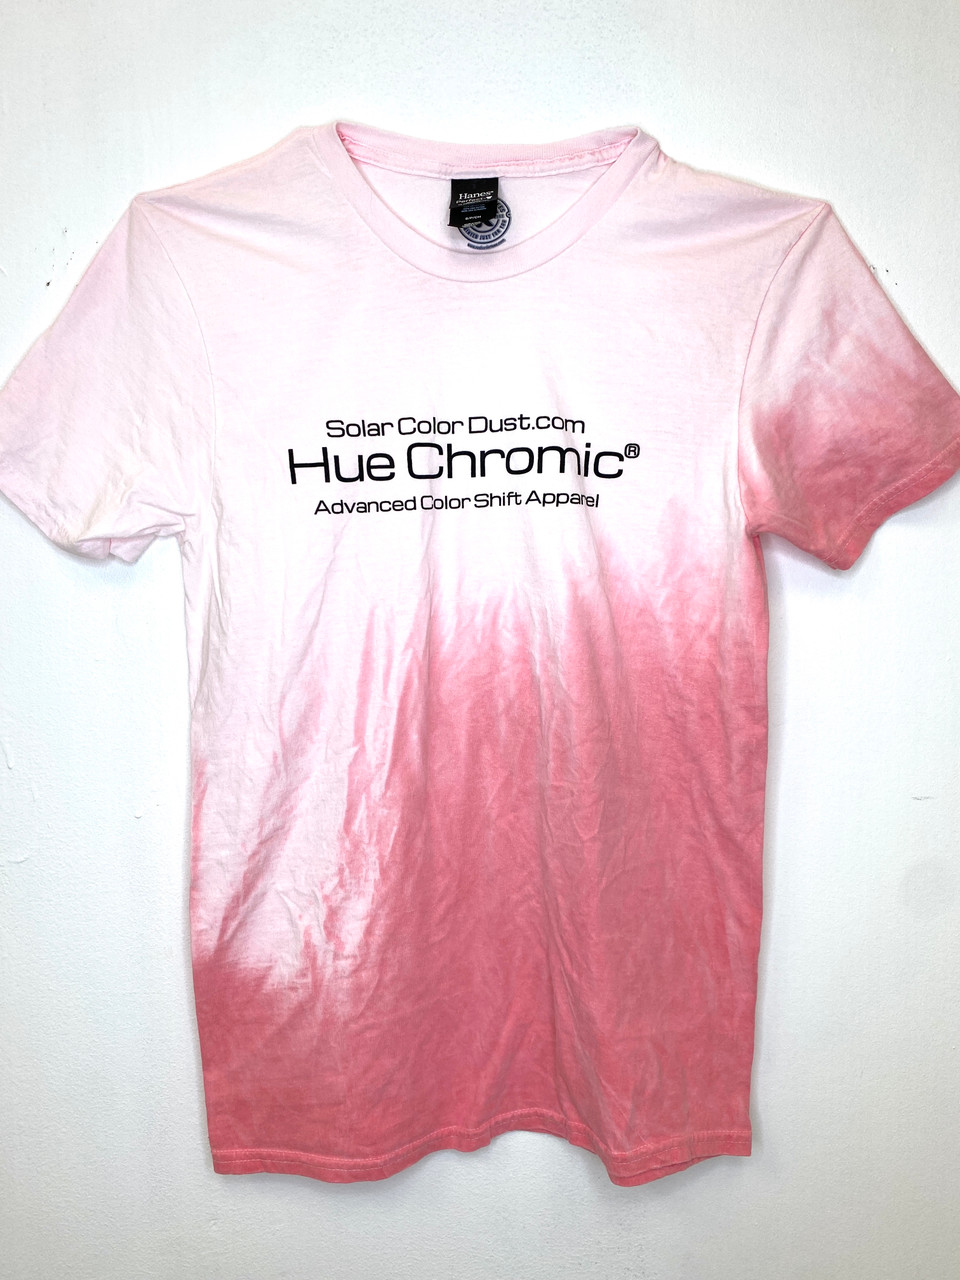 Hue Chromic™ Fabric Dye - Red to Colorless